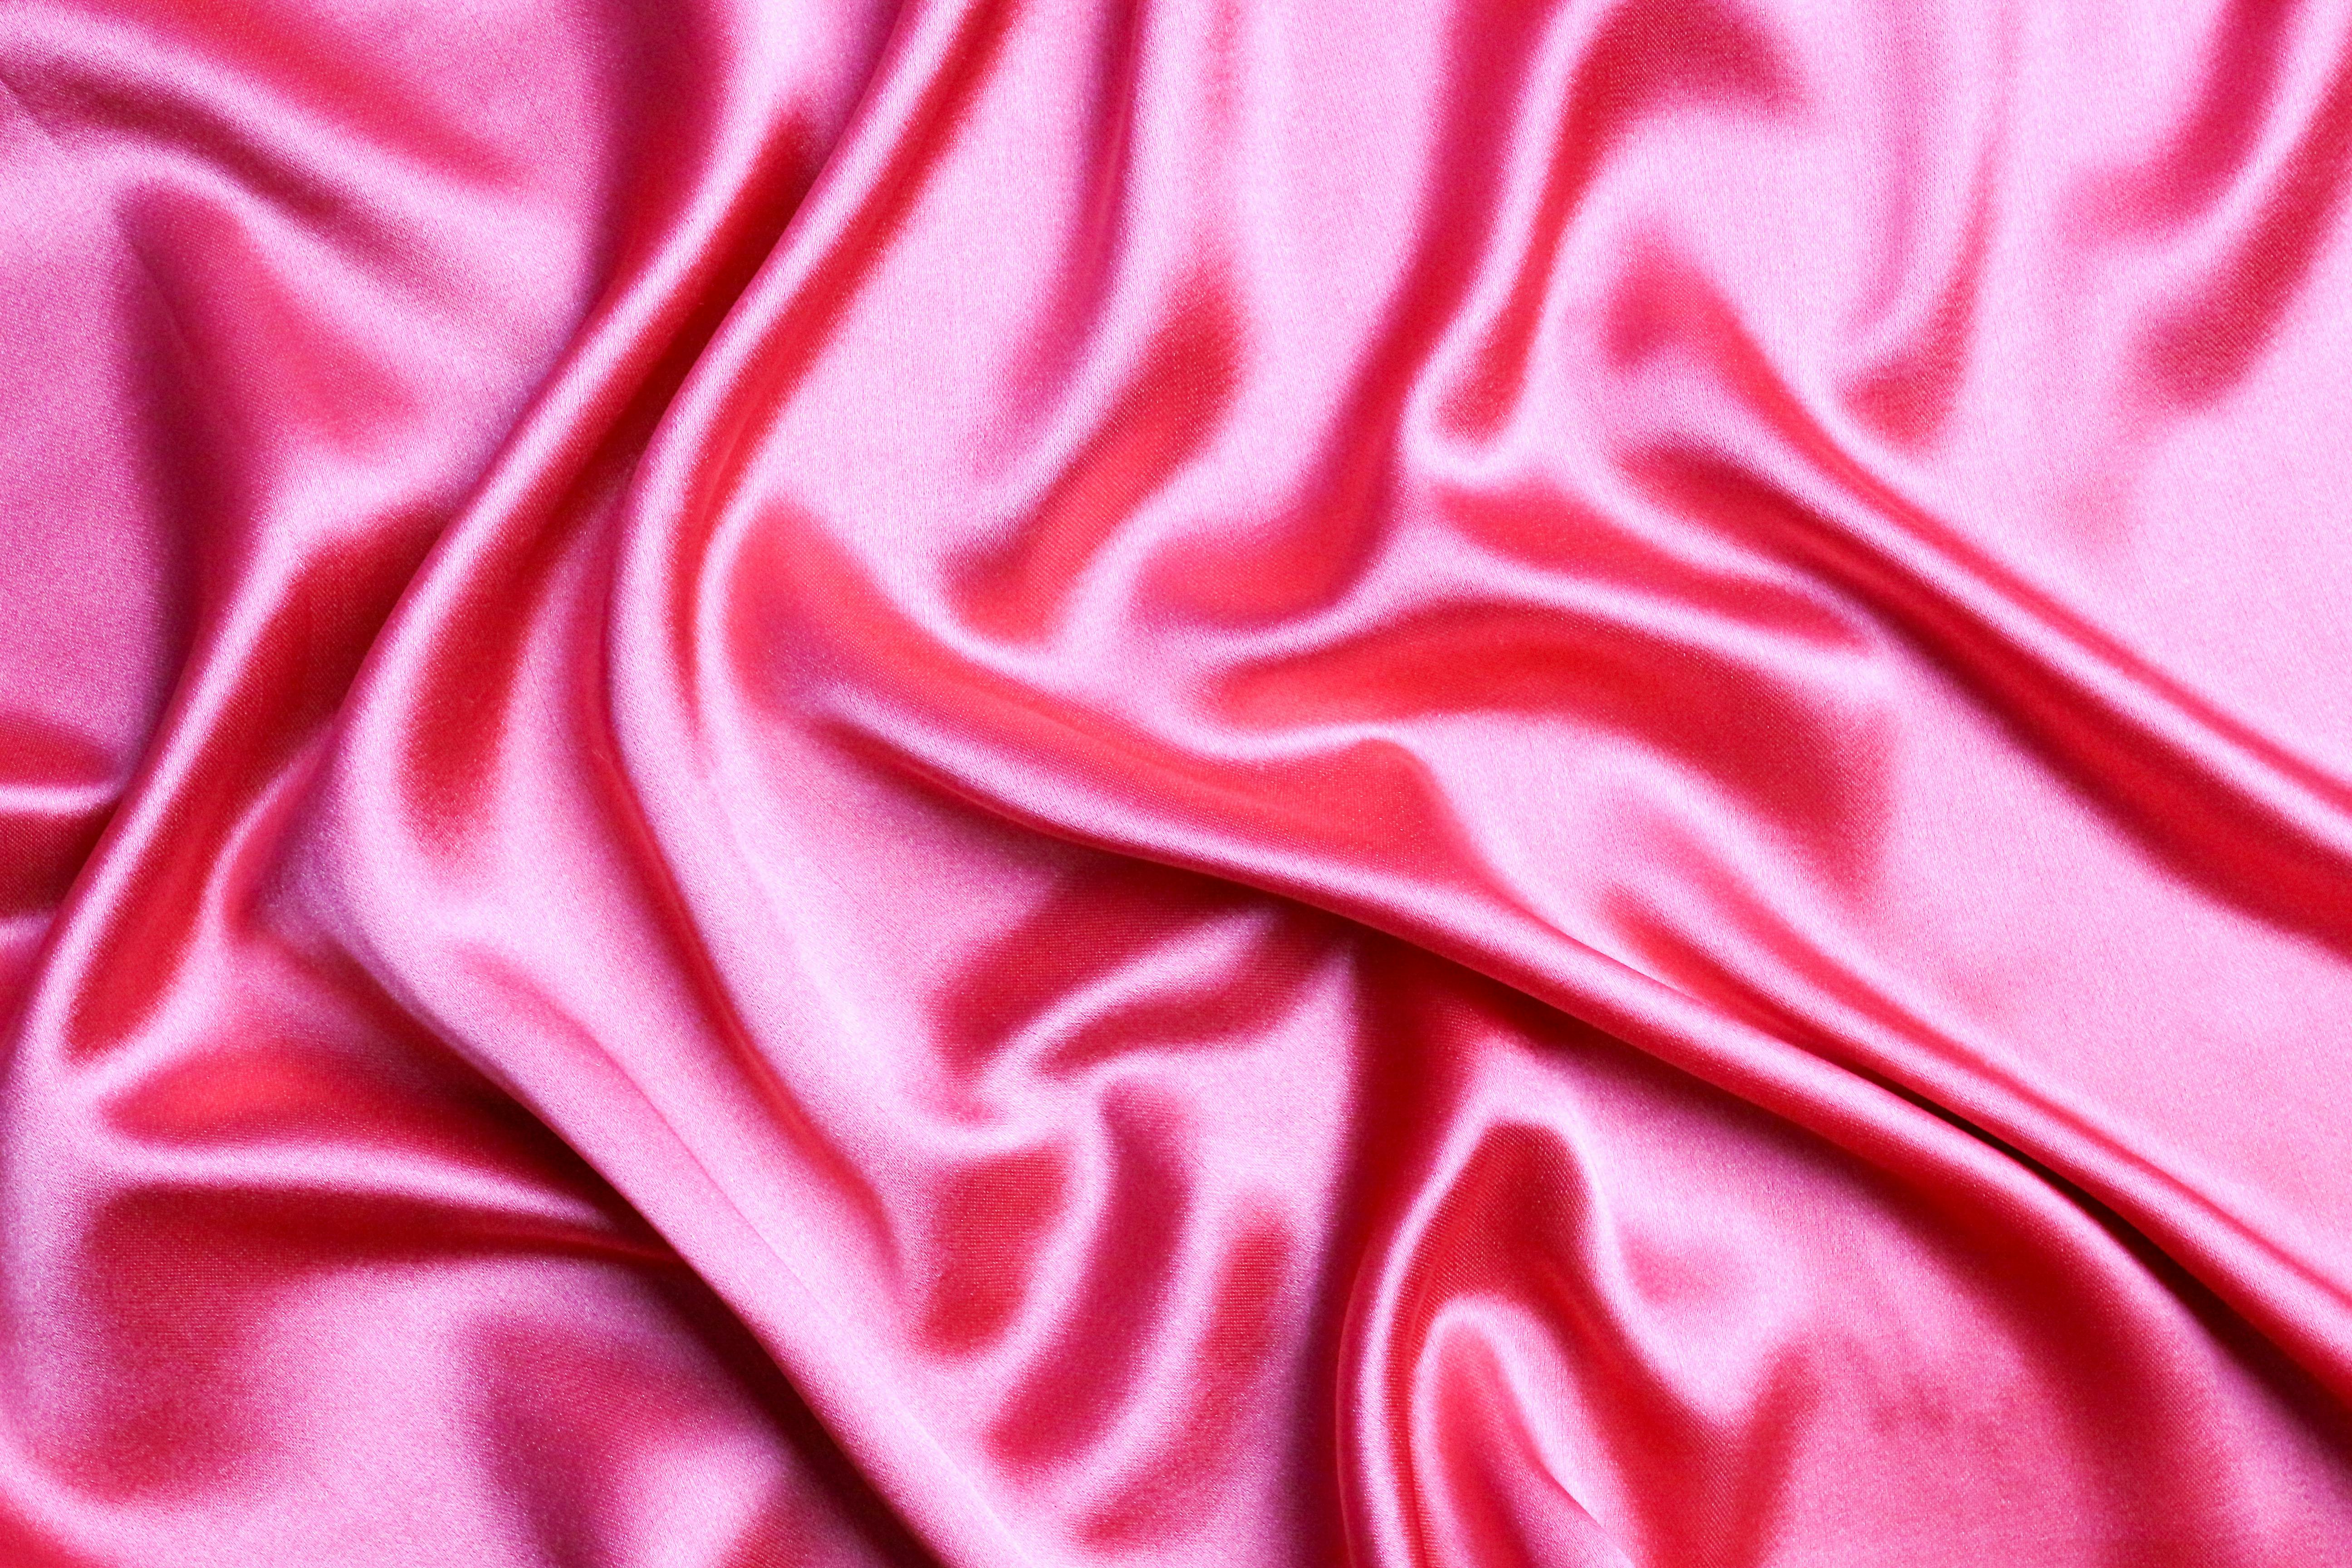 Pink String Roll On Pink Background. Top View Stock Photo, Picture and  Royalty Free Image. Image 146081259.